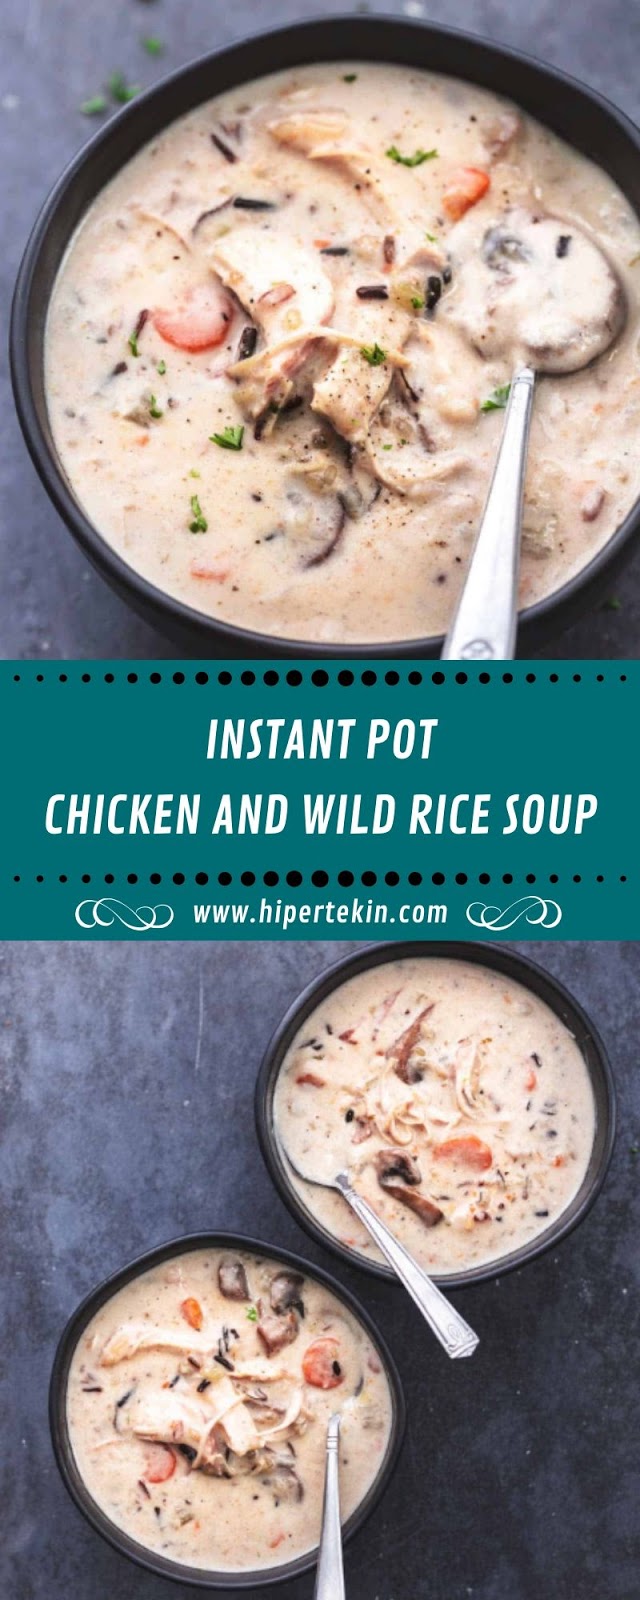 INSTANT POT CHICKEN AND WILD RICE SOUP